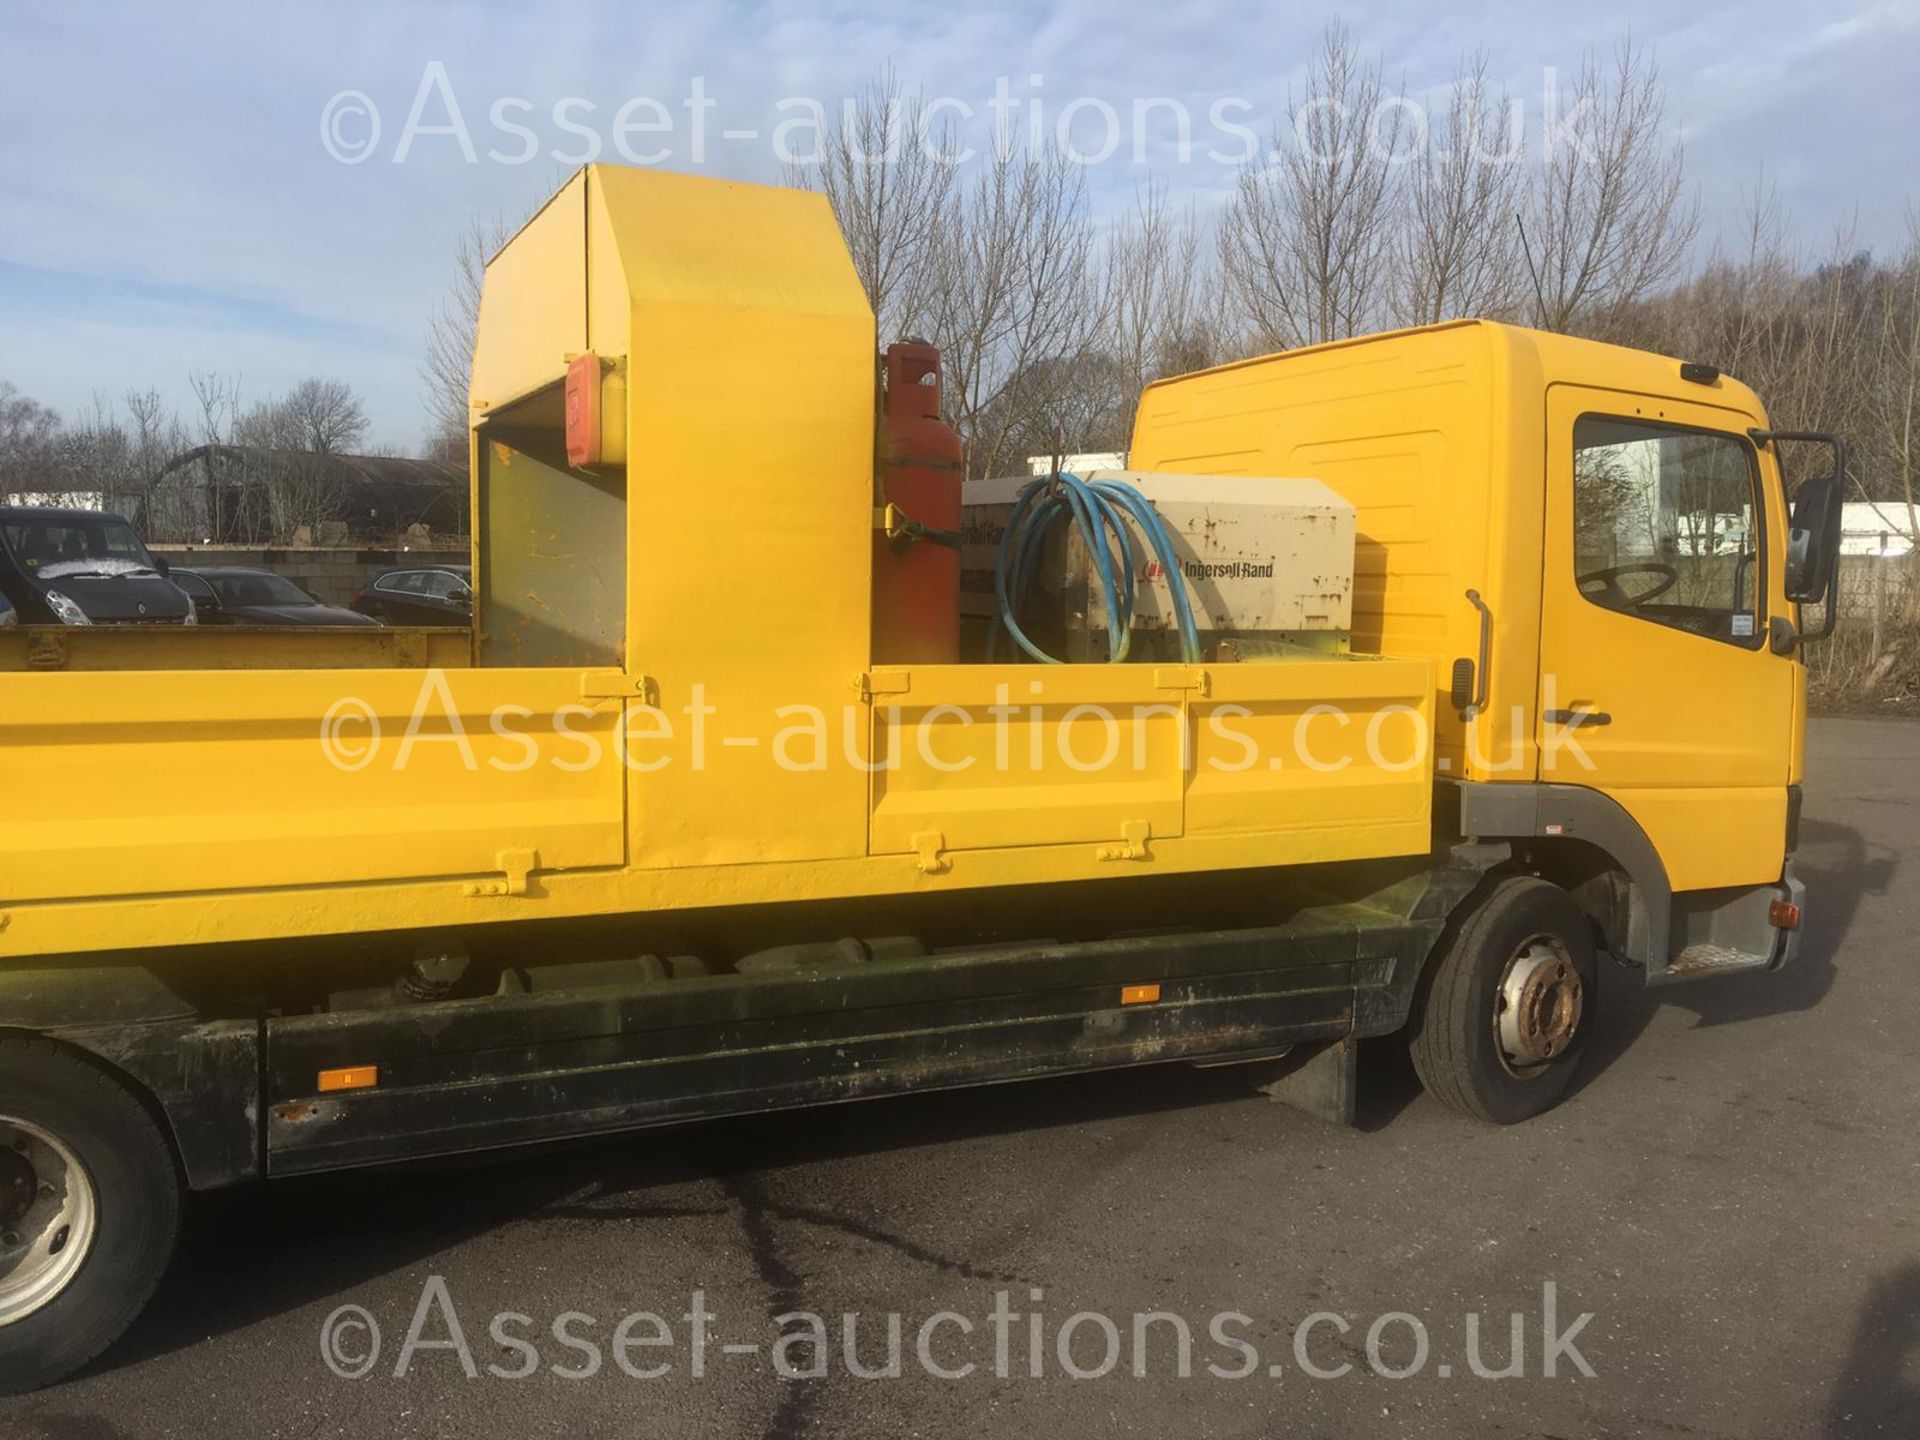 2004/54 REG MERCEDES ATEGO 1018 DAY YELLOW DROPSIDE LINE PAINTING LORRY 4.3L DIESEL ENGINE *NO VAT* - Image 19 of 128